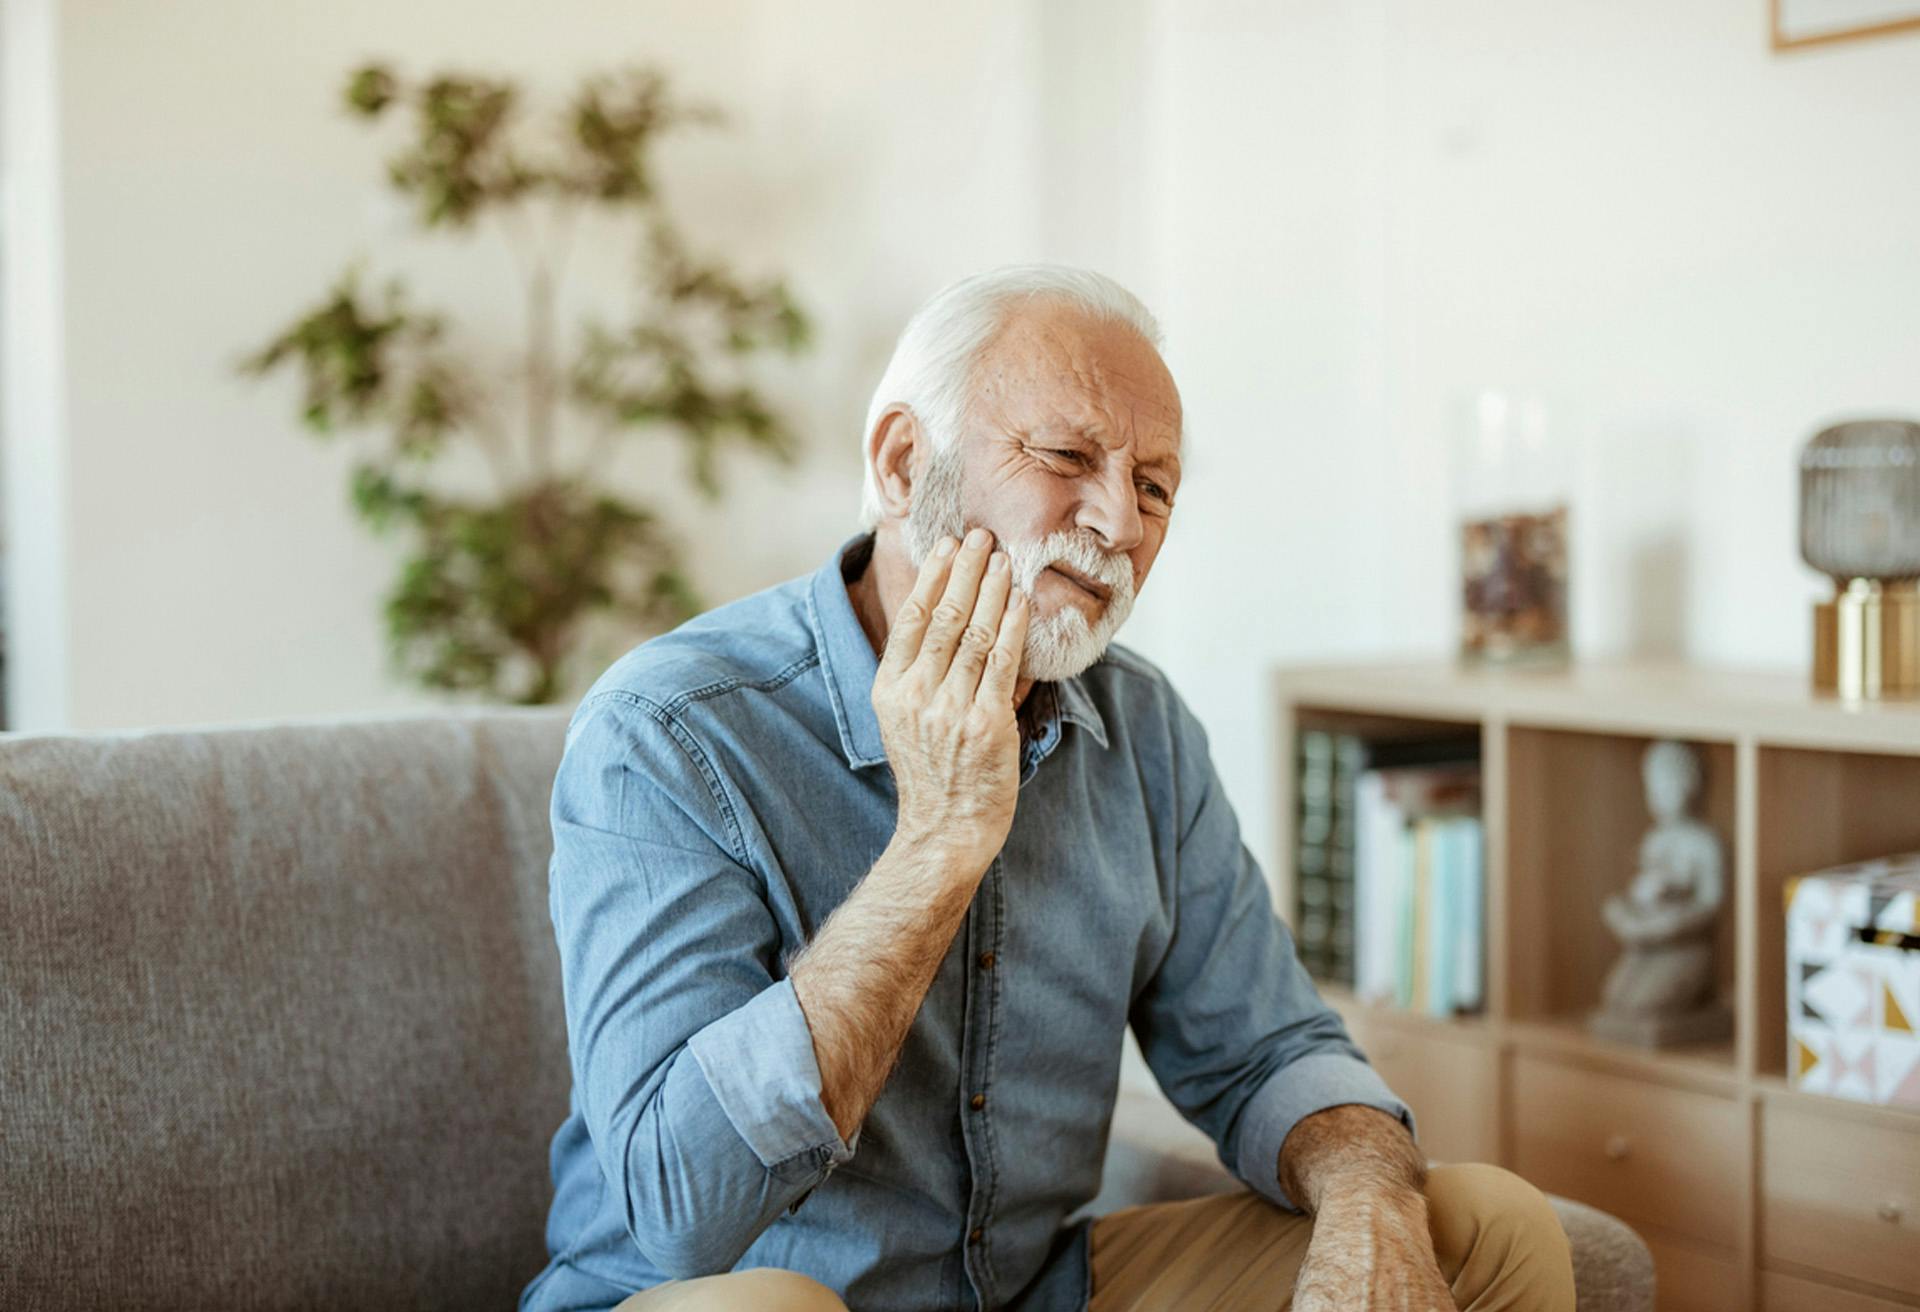 older man sitting on a couch with his hand on his chin